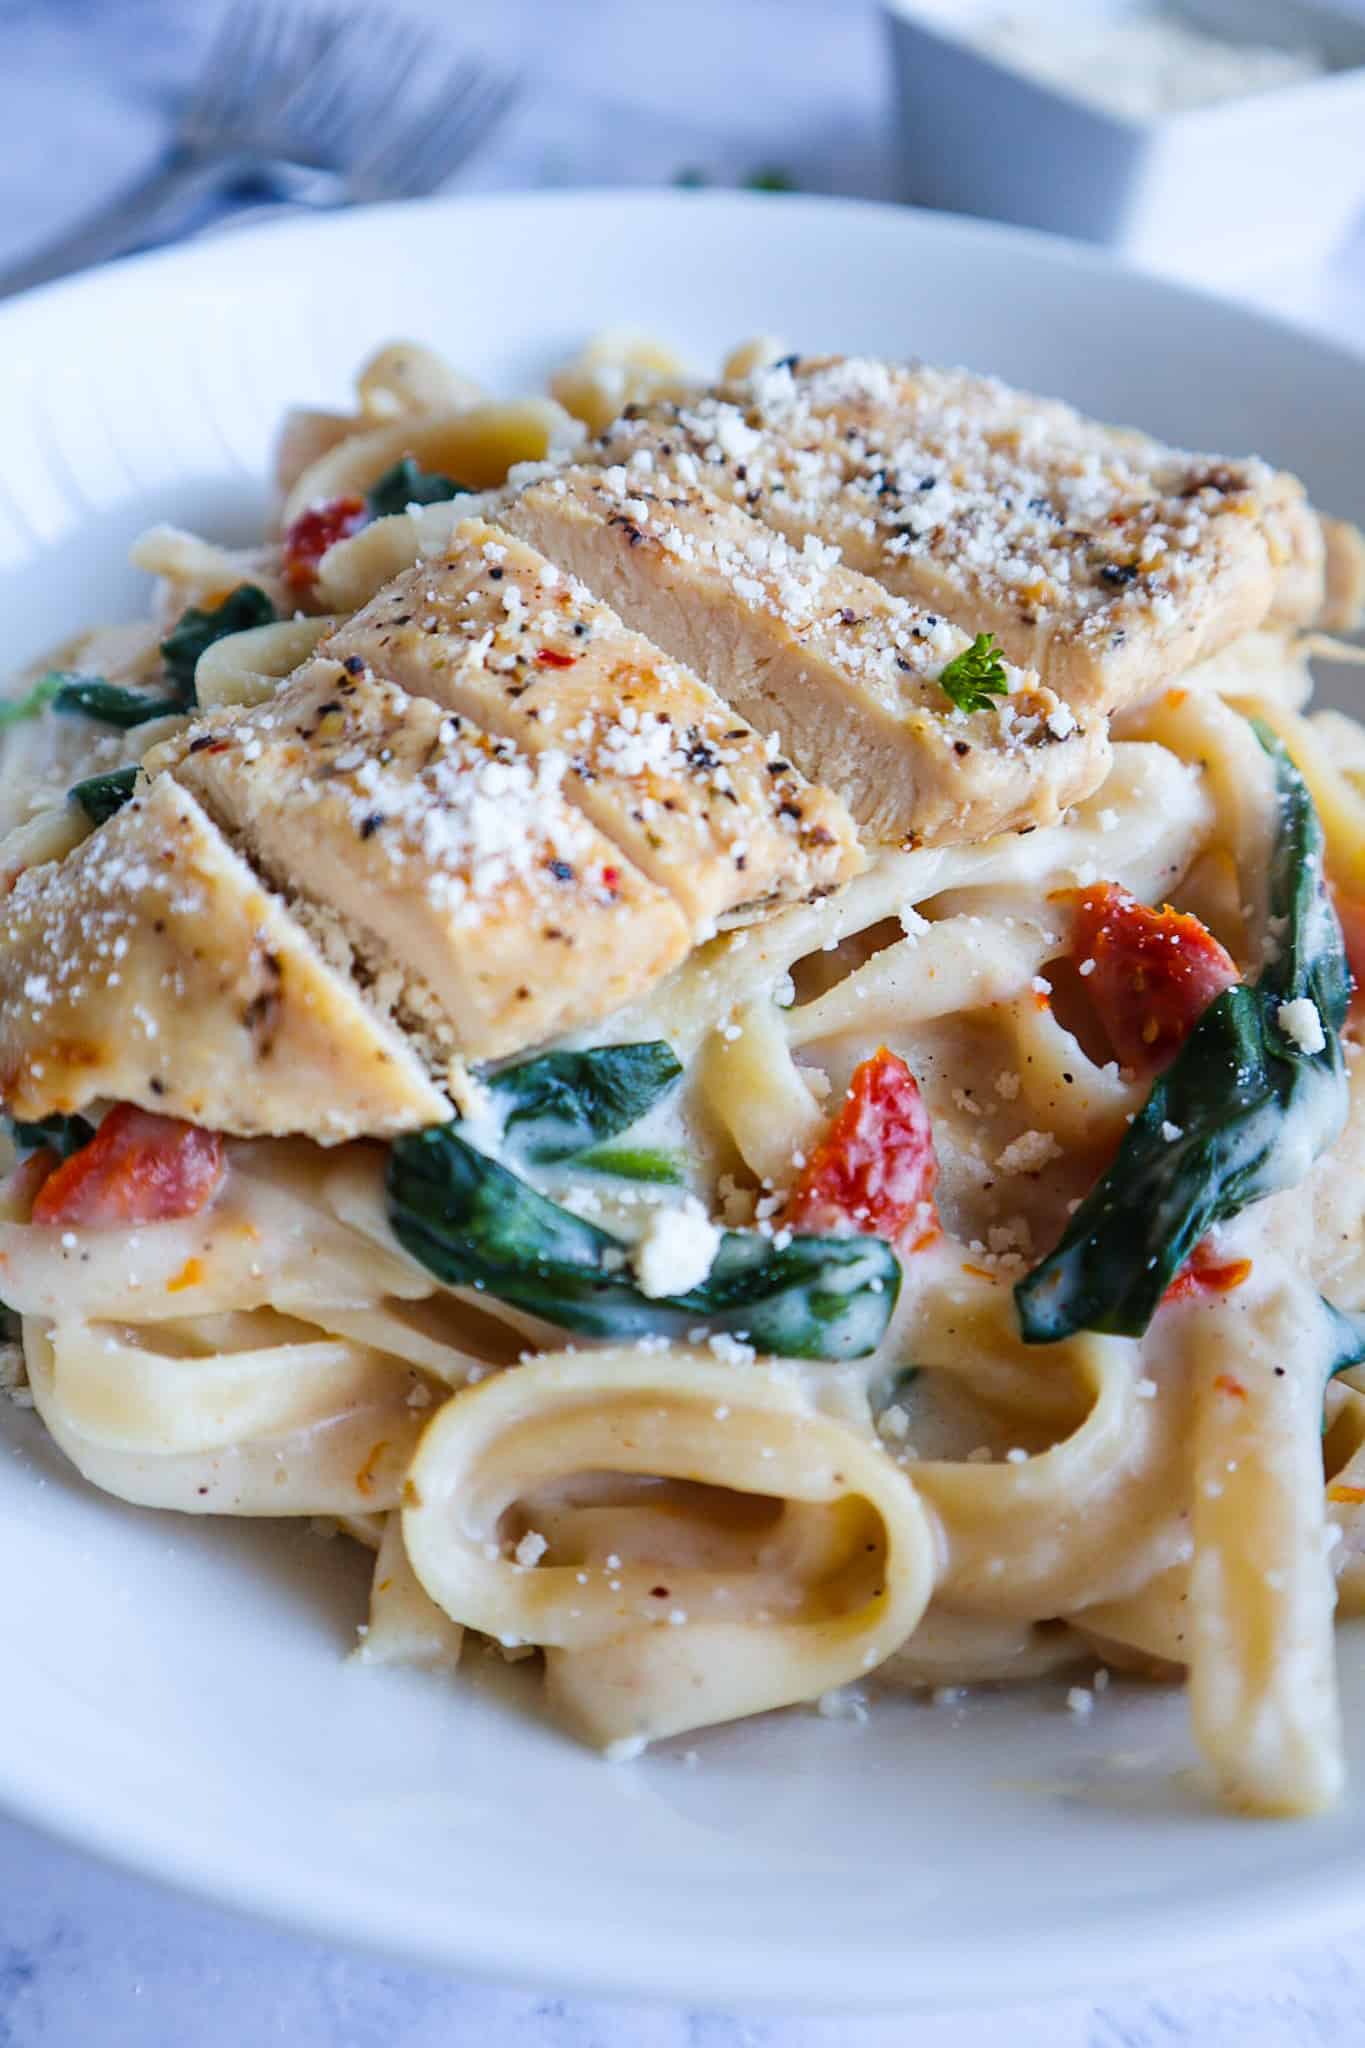 A dish of fettuccine alfredo with grilled chicken, sun dried tomatoes, spinach and parmesan cheese.